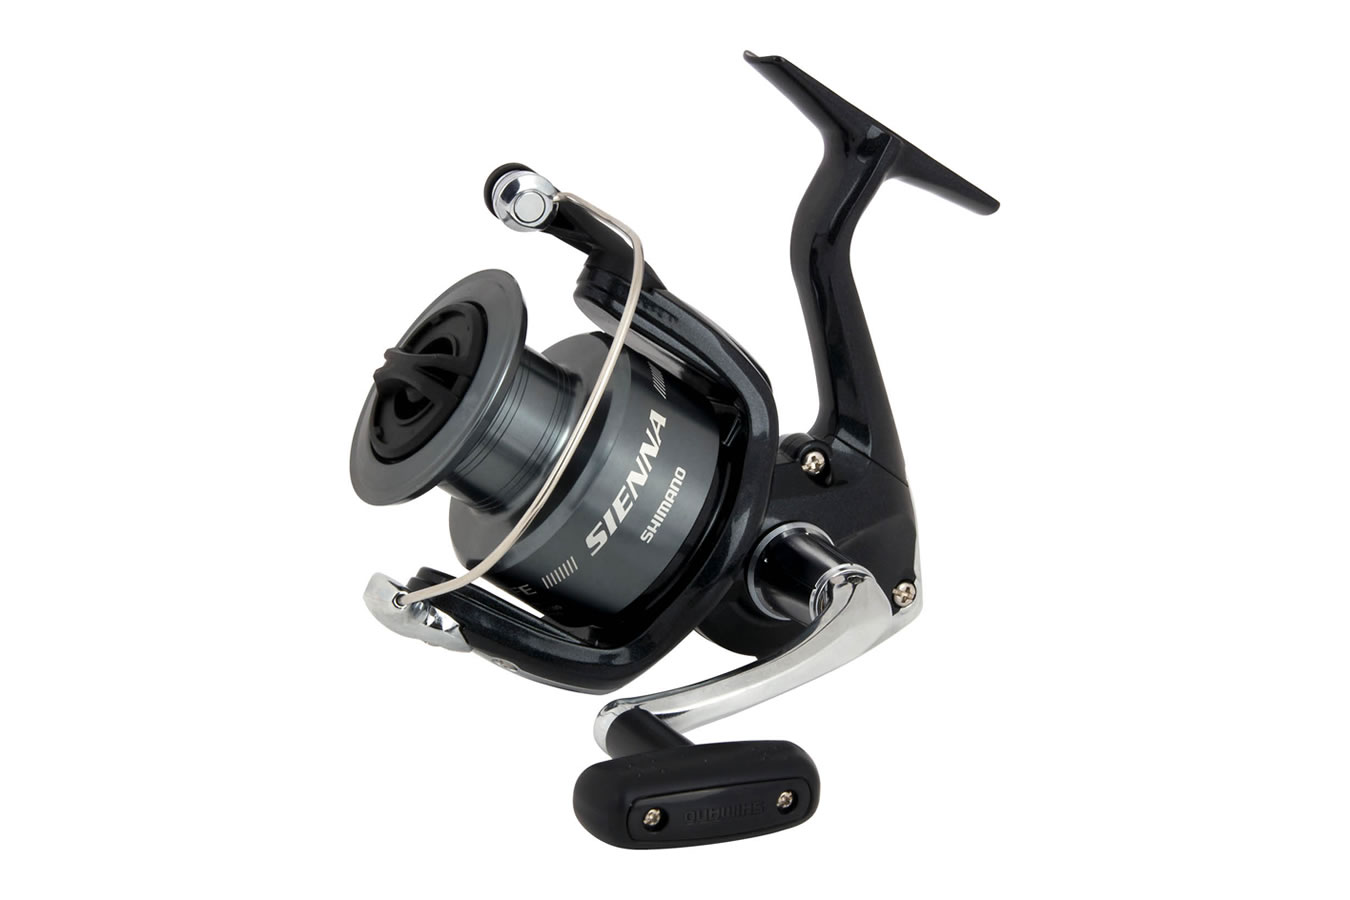 Discount Shimano Sienna 2500 FE - Spinning Reel (5.0:1) for Sale